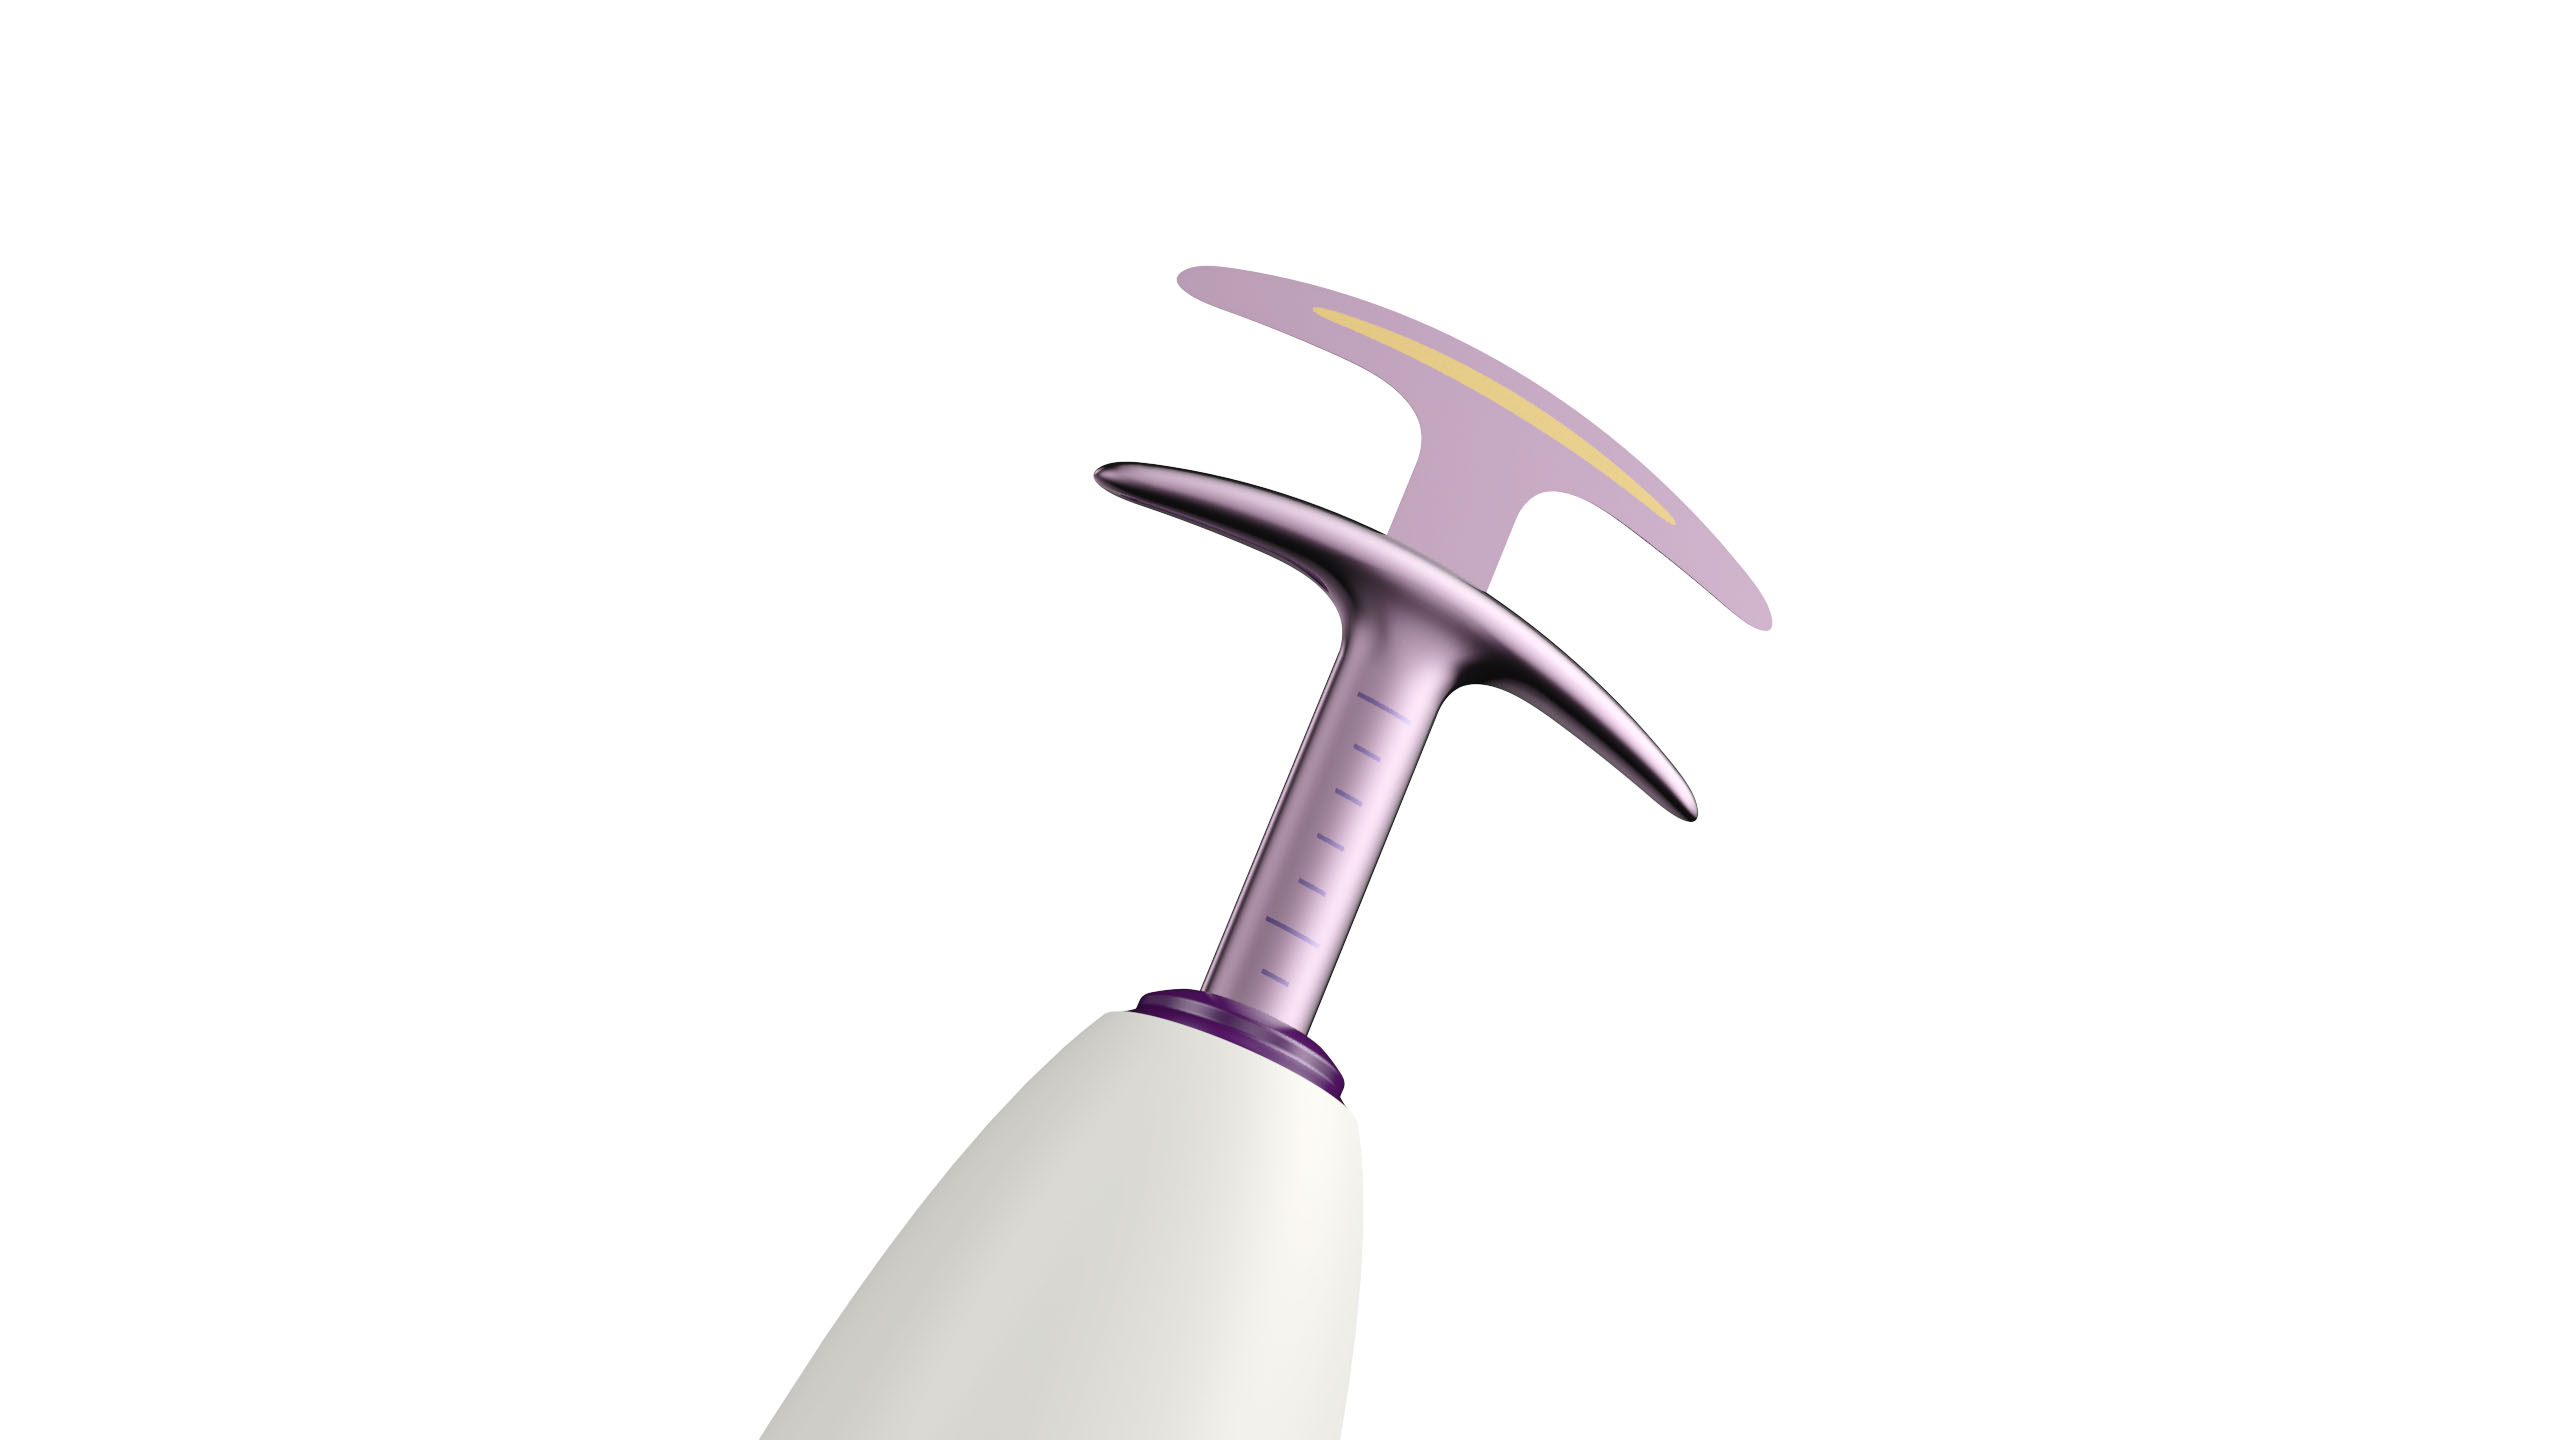 Whale-tail Shaped Cosmetic Orientator